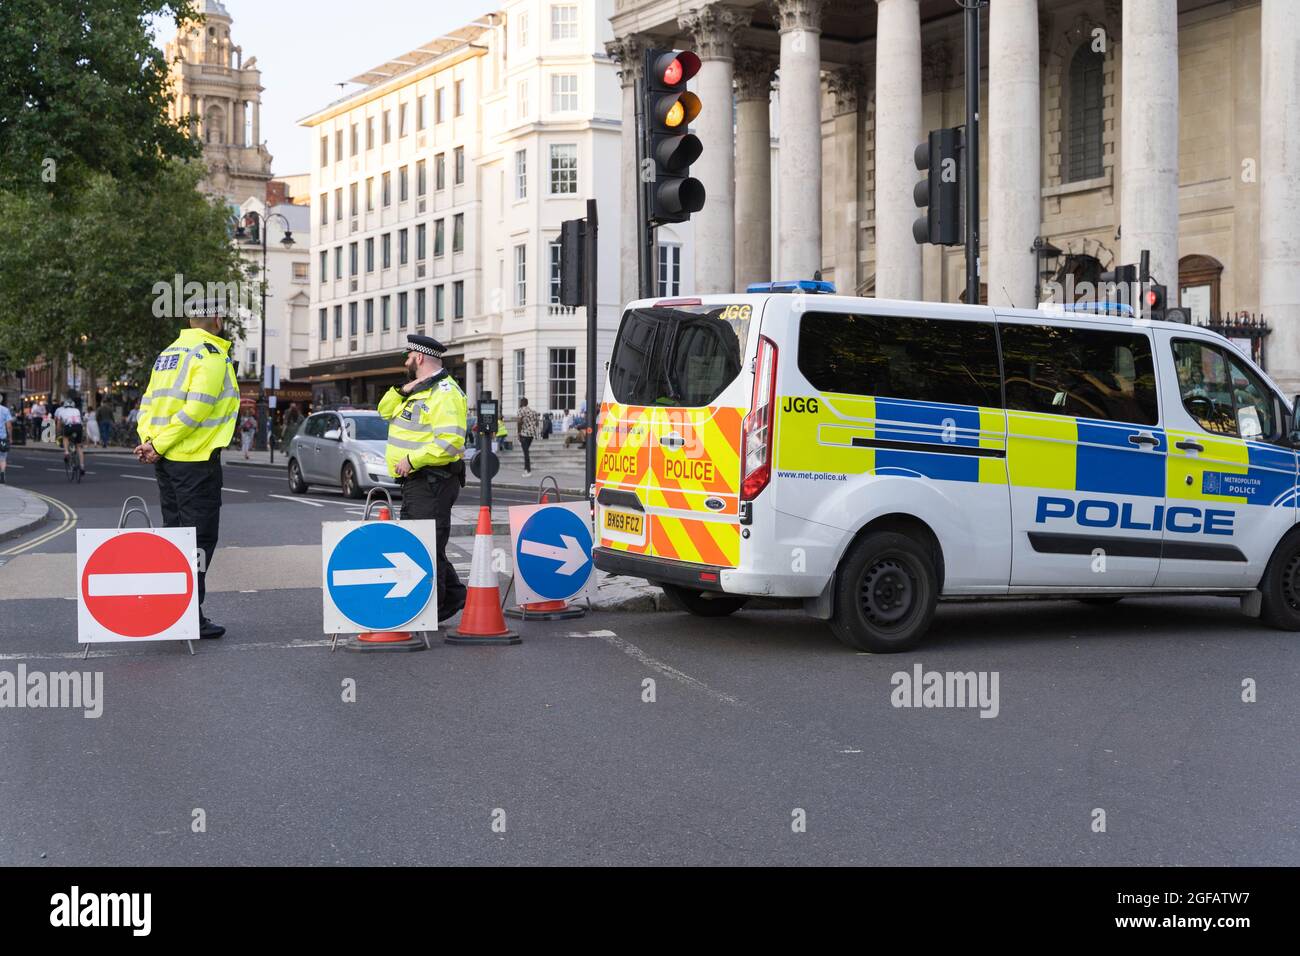 Cambridge Circus, London, UK. 24th August 2021. Climate change protesters from Extinction Rebellion protesting at Cambridge Circus , blocking Charing Cross road along the way to Trafalgar Square. Credit: Xiu Bao/Alamy Live News Stock Photo